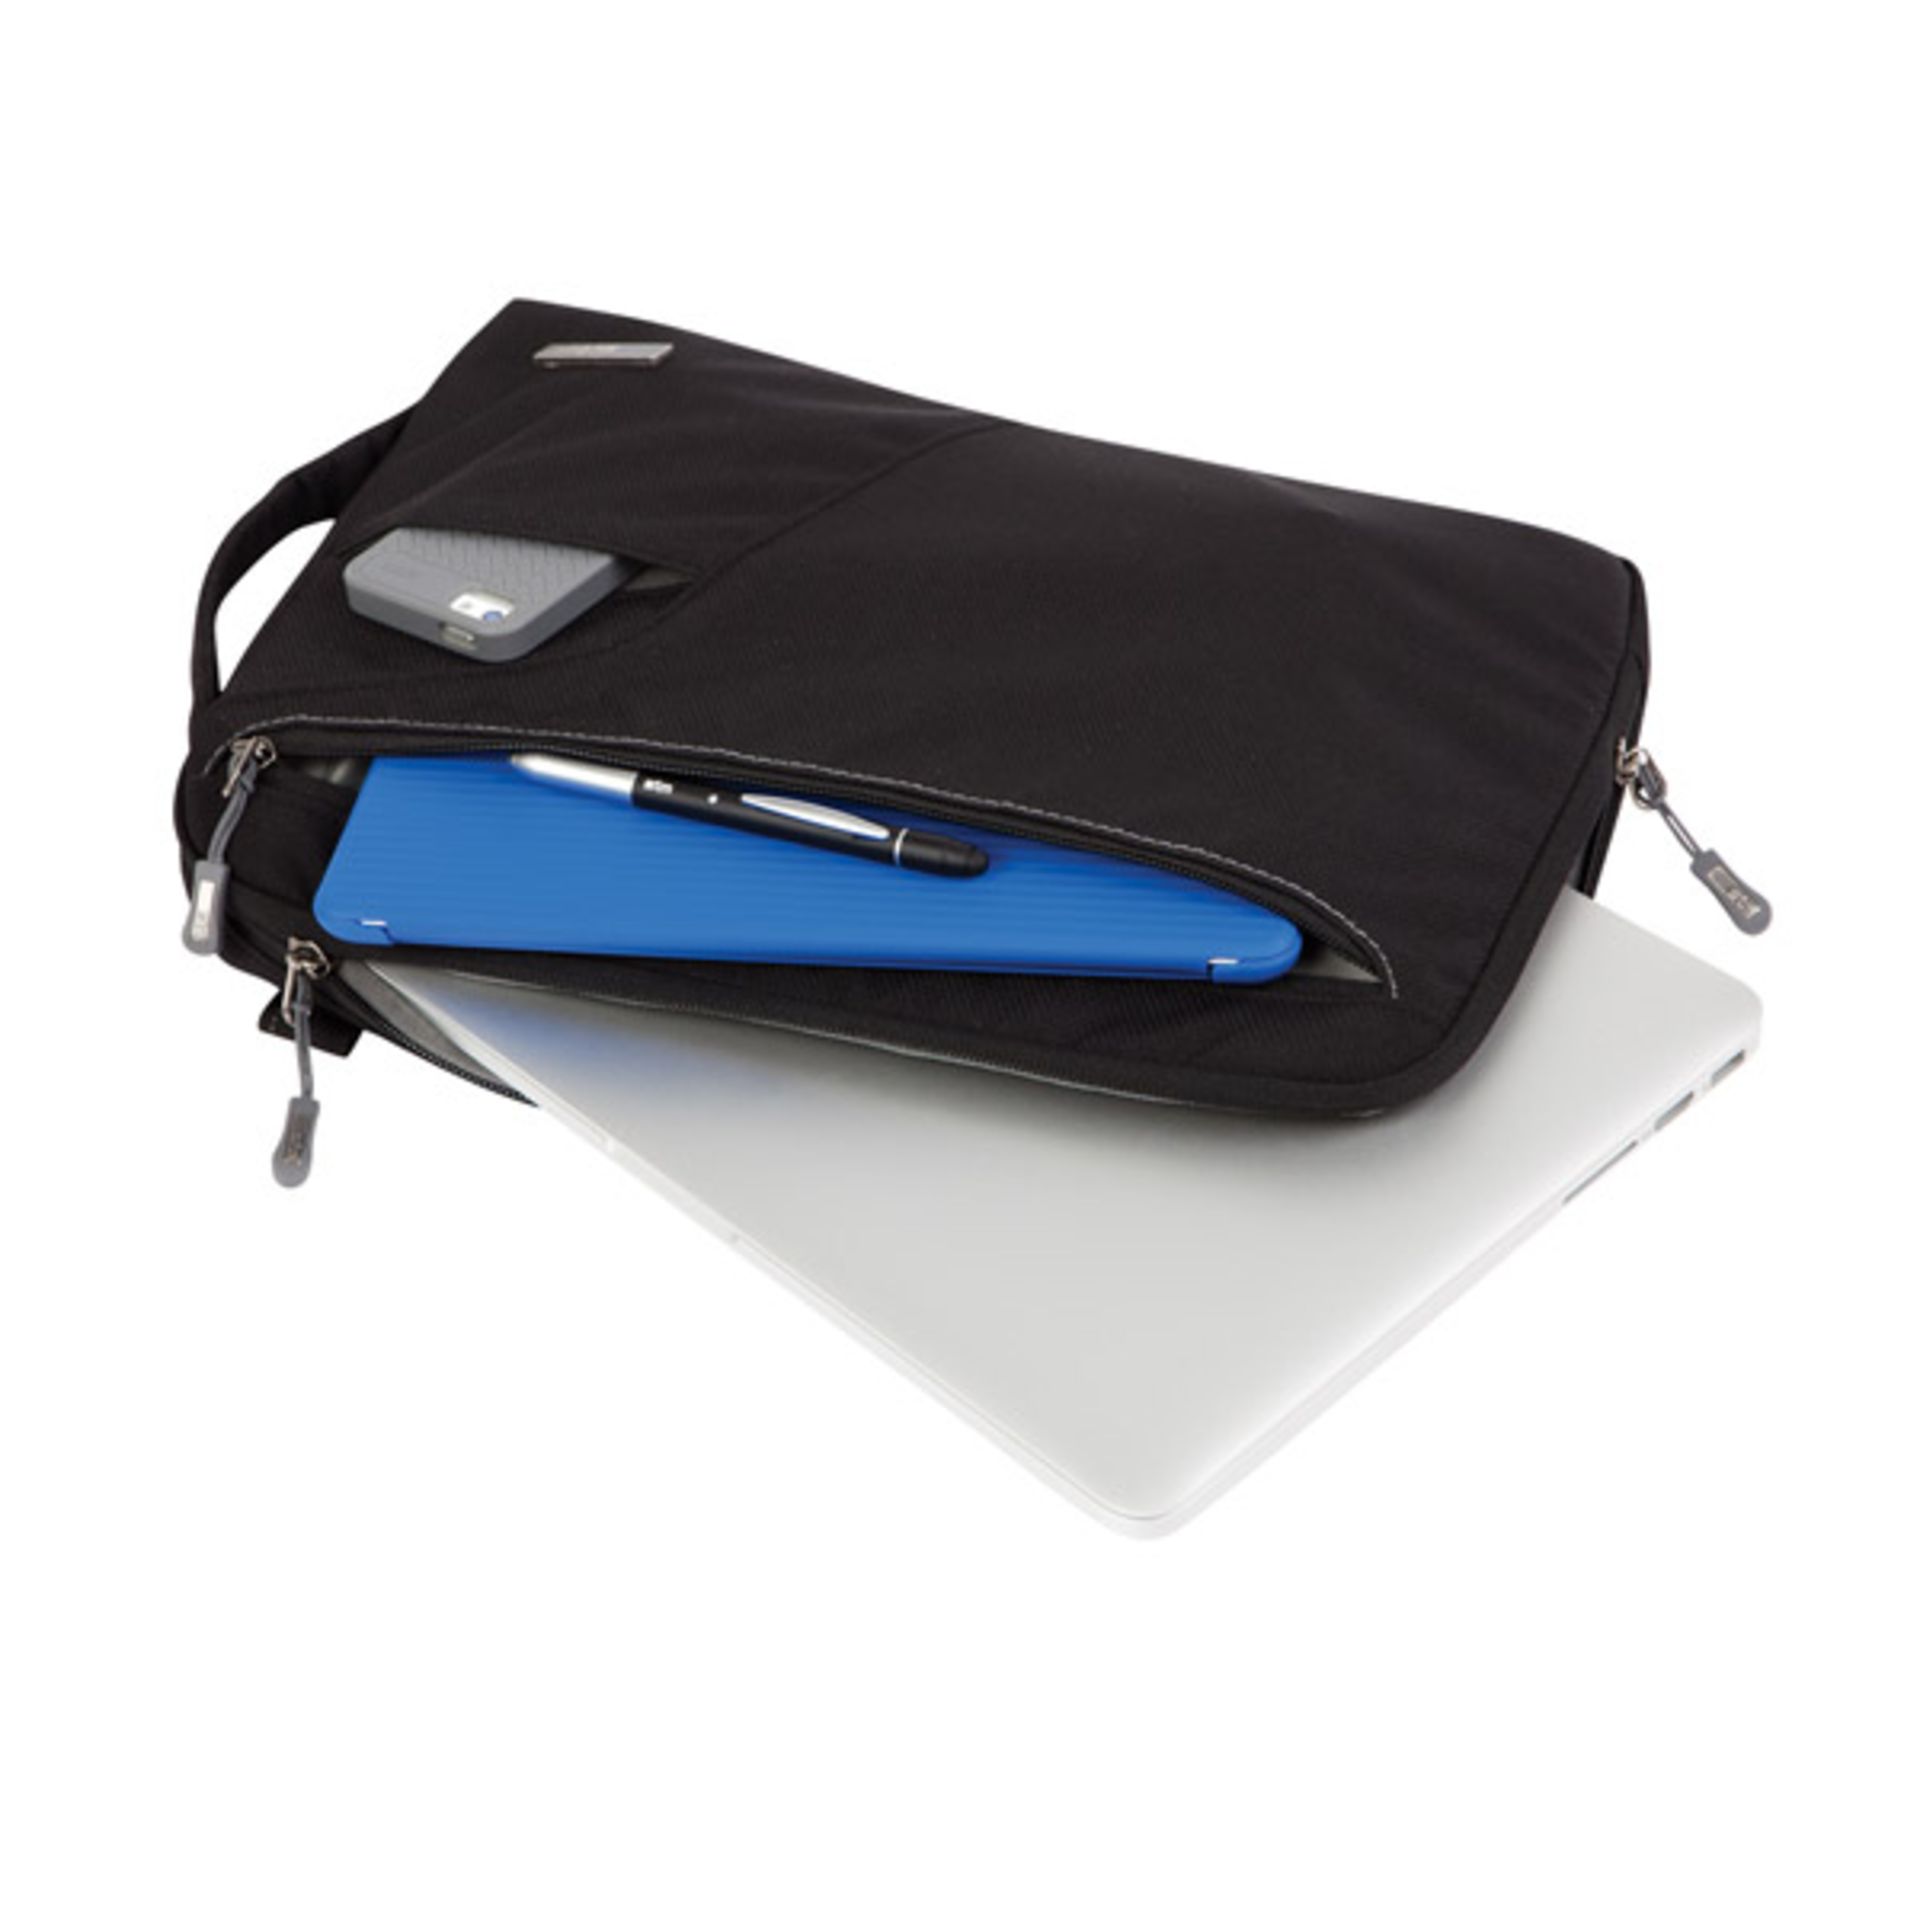 V *TRADE QTY* Brand New STM Blazer Padded Sleeve Bag For Laptops And Tablets 11" Black With - Image 2 of 2